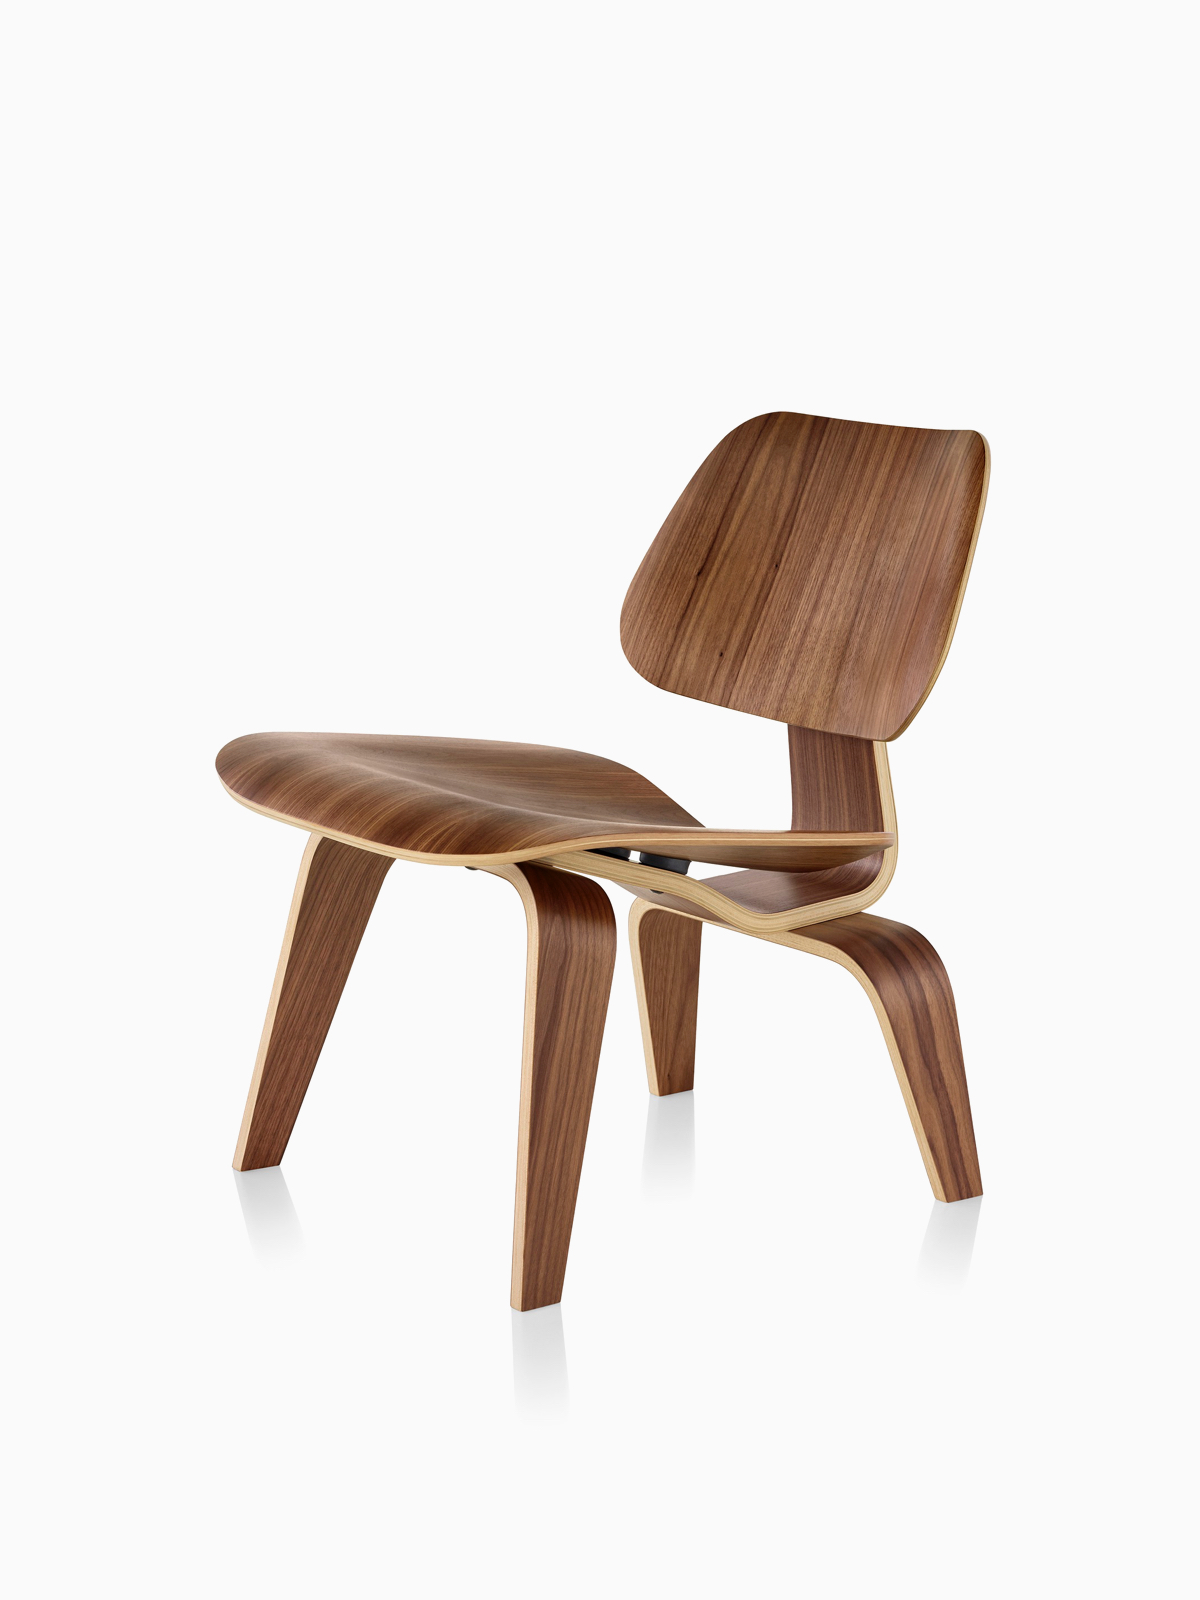 Eames Molded Plywood Chairs